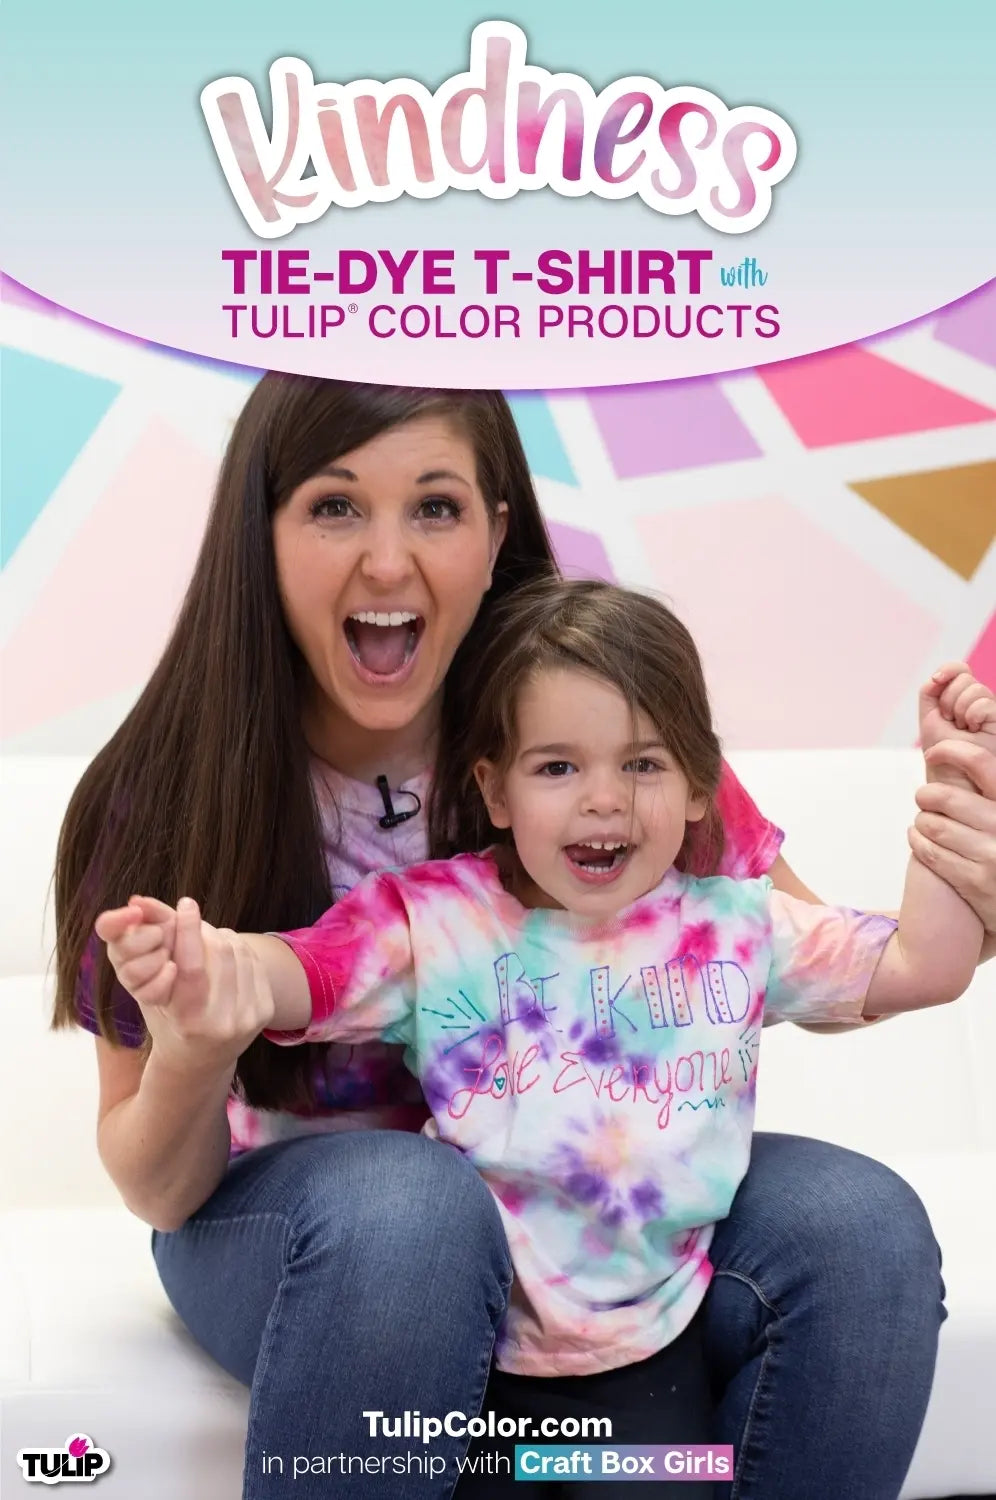 Mommy and Me Idea: Words of Kindness Tie-Dye T-shirts